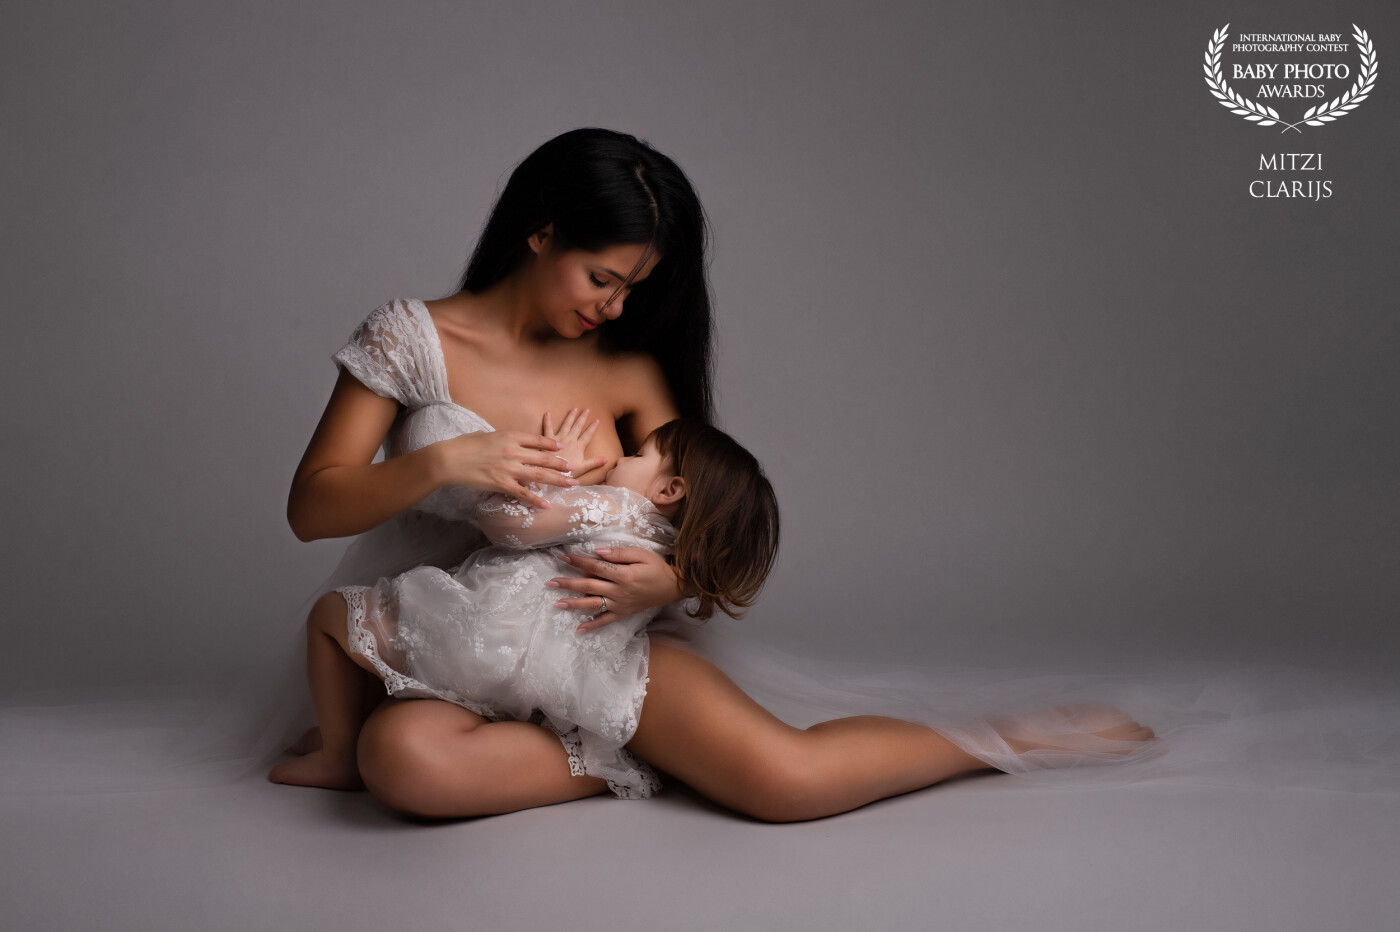 Another gorgeous mom with her little one. I love to include special moments for them in the photoshoot. Breastfeeding is such an intimate moment between mom and her children, so precious to have this captured forever.